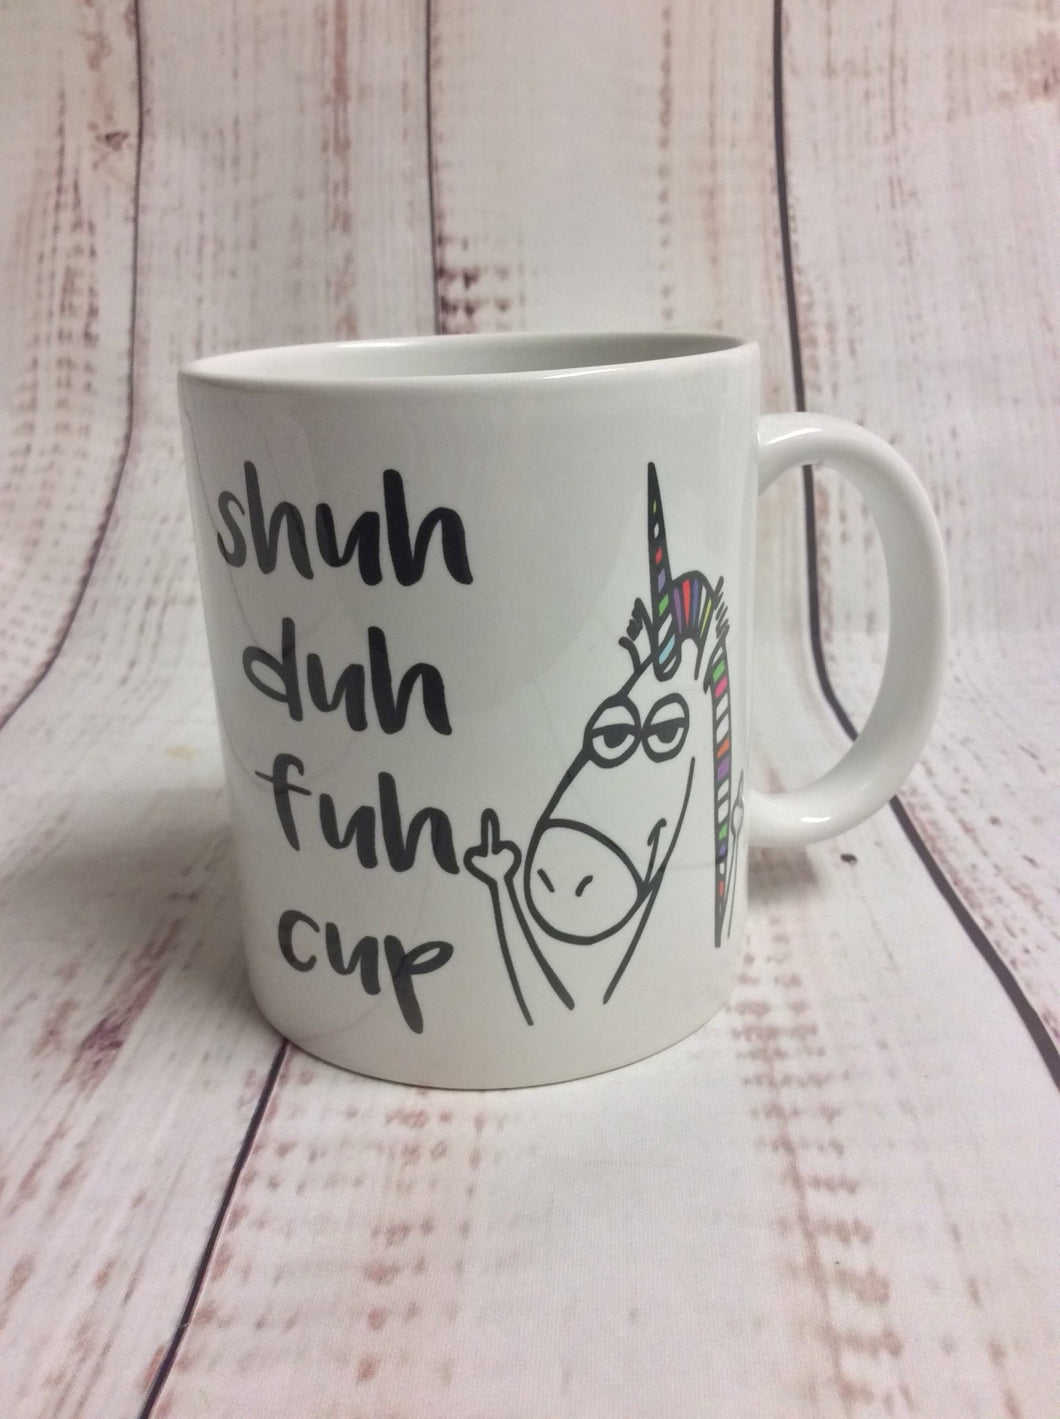 Unicorn mug, shut duh fuh cup.... Funny Co worker Gifts, Funny office mugs - My Other Child / Blooms n' Rooms